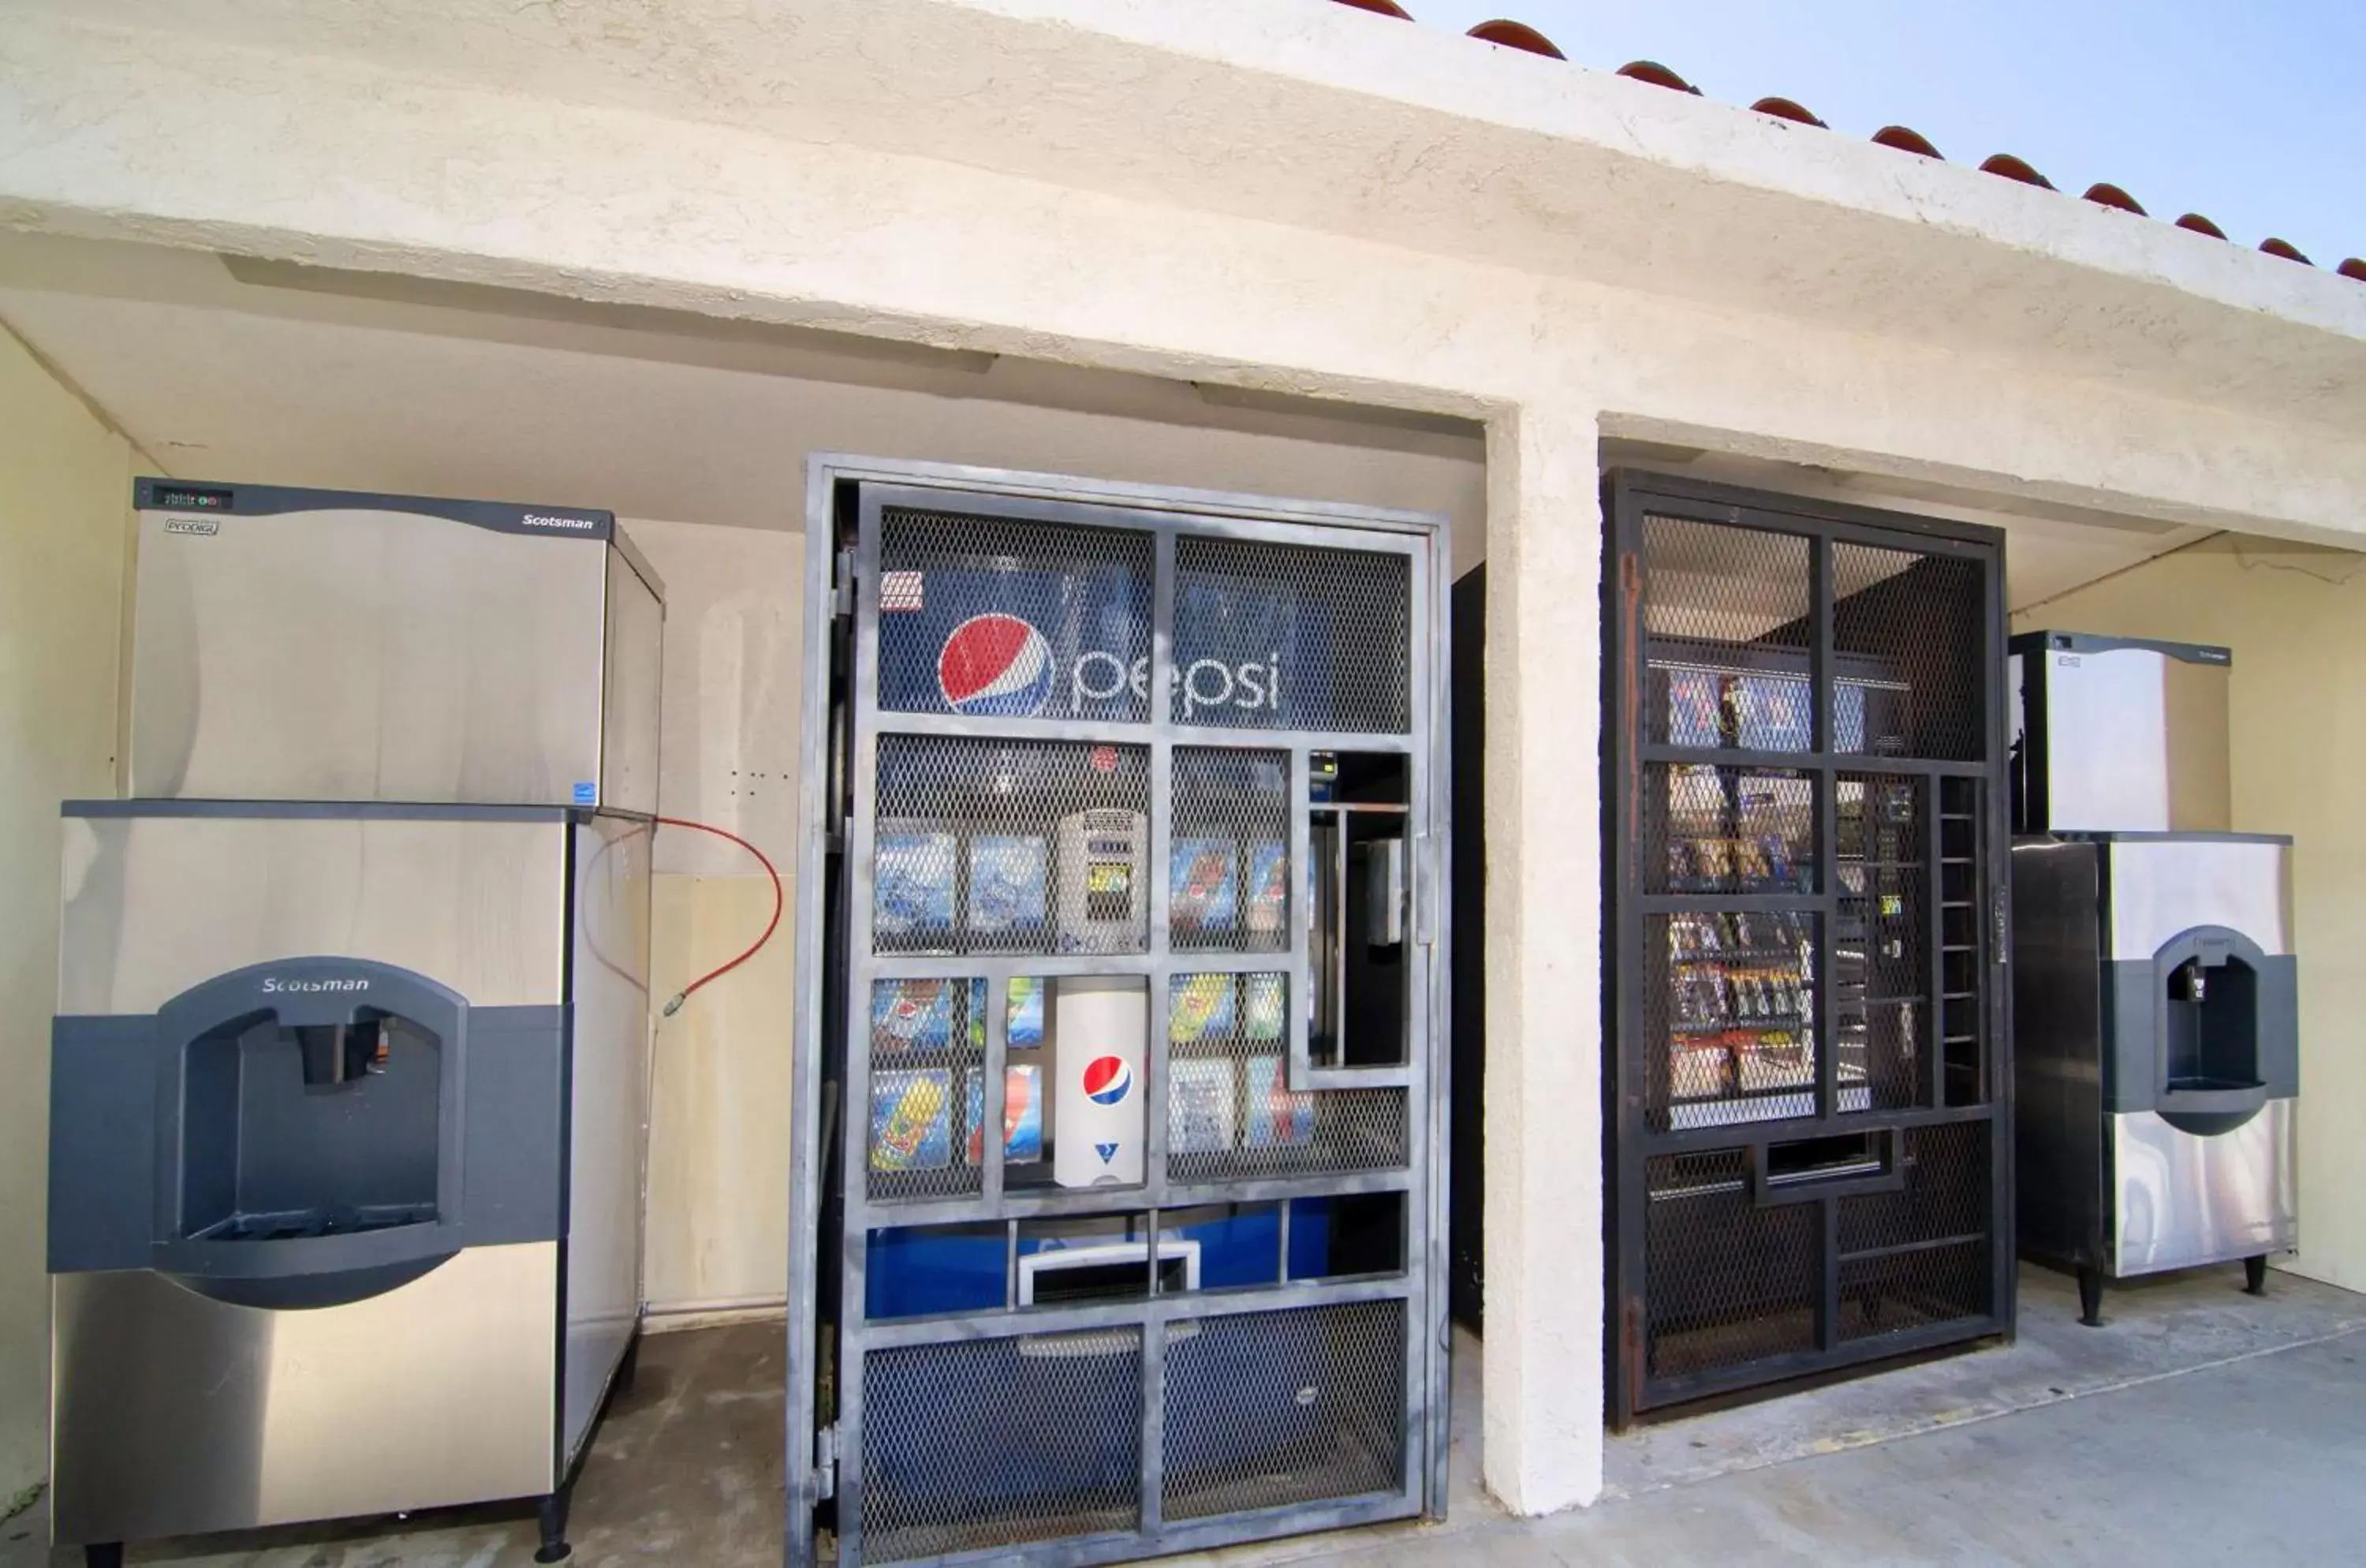 Property building in Motel 6-North Palm Springs, CA - North